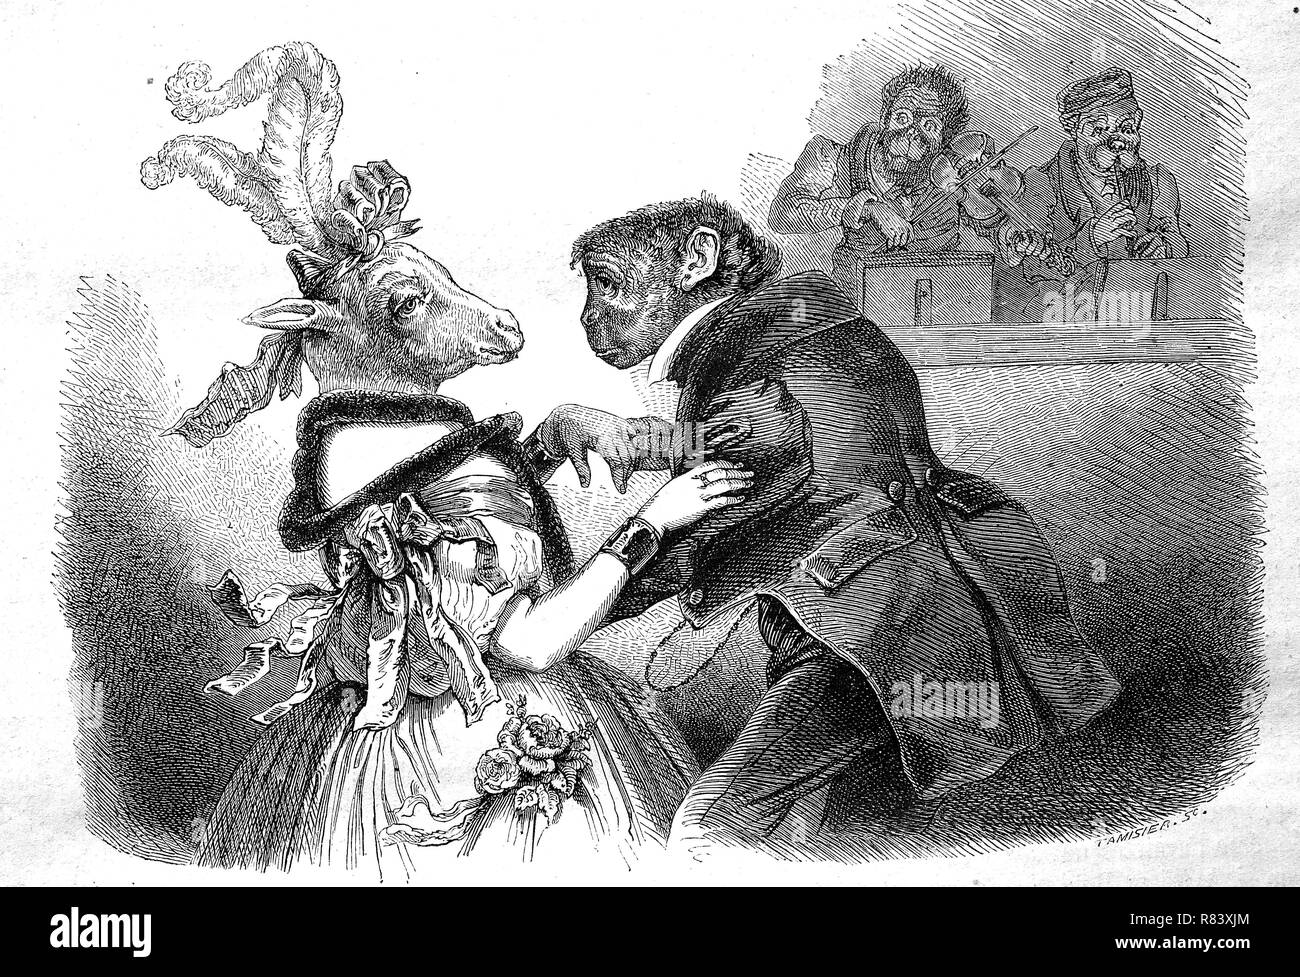 Digital improved reproduction, The ball of the animals, a monkey dances with a sheep, Der Ball der Tiere, ein Affe tanzt mit einem Schaf, from an original print from the year 1855 Stock Photo